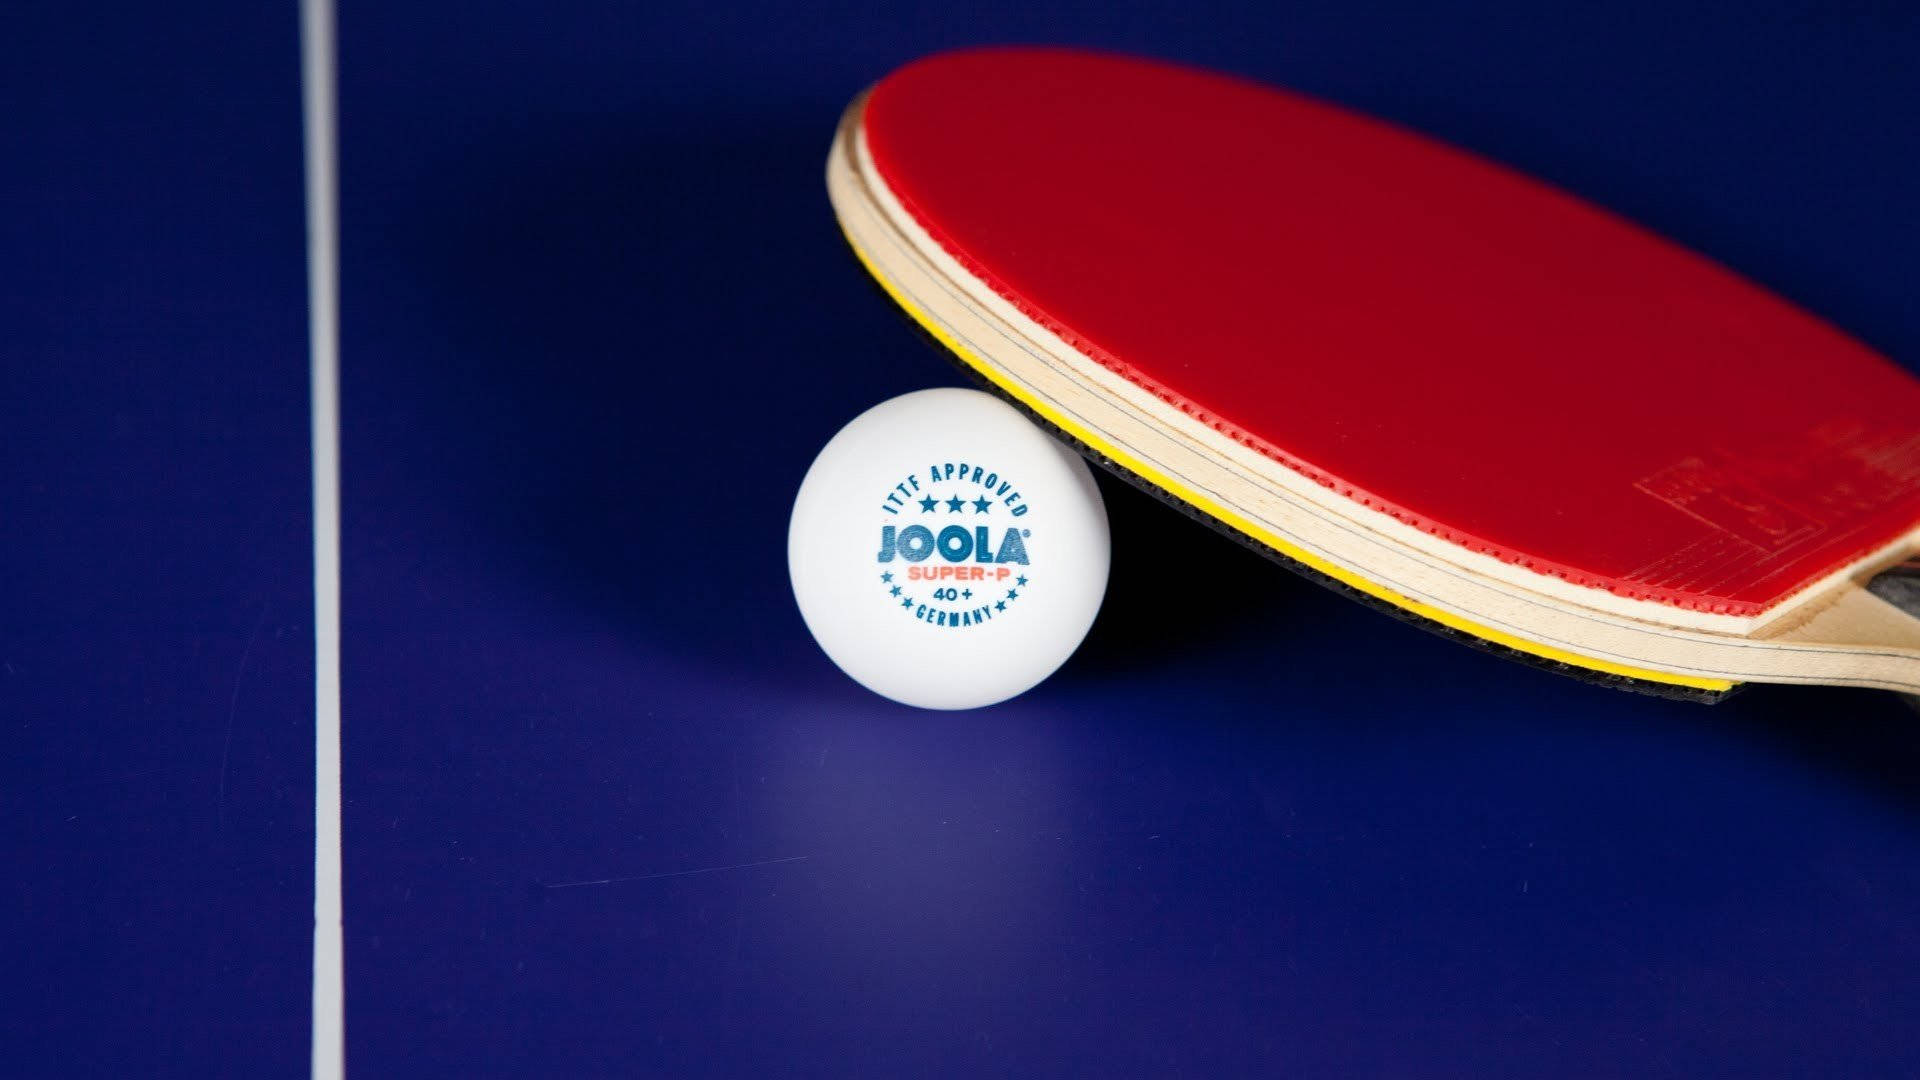 Expensive Table Tennis Joola Ball Background